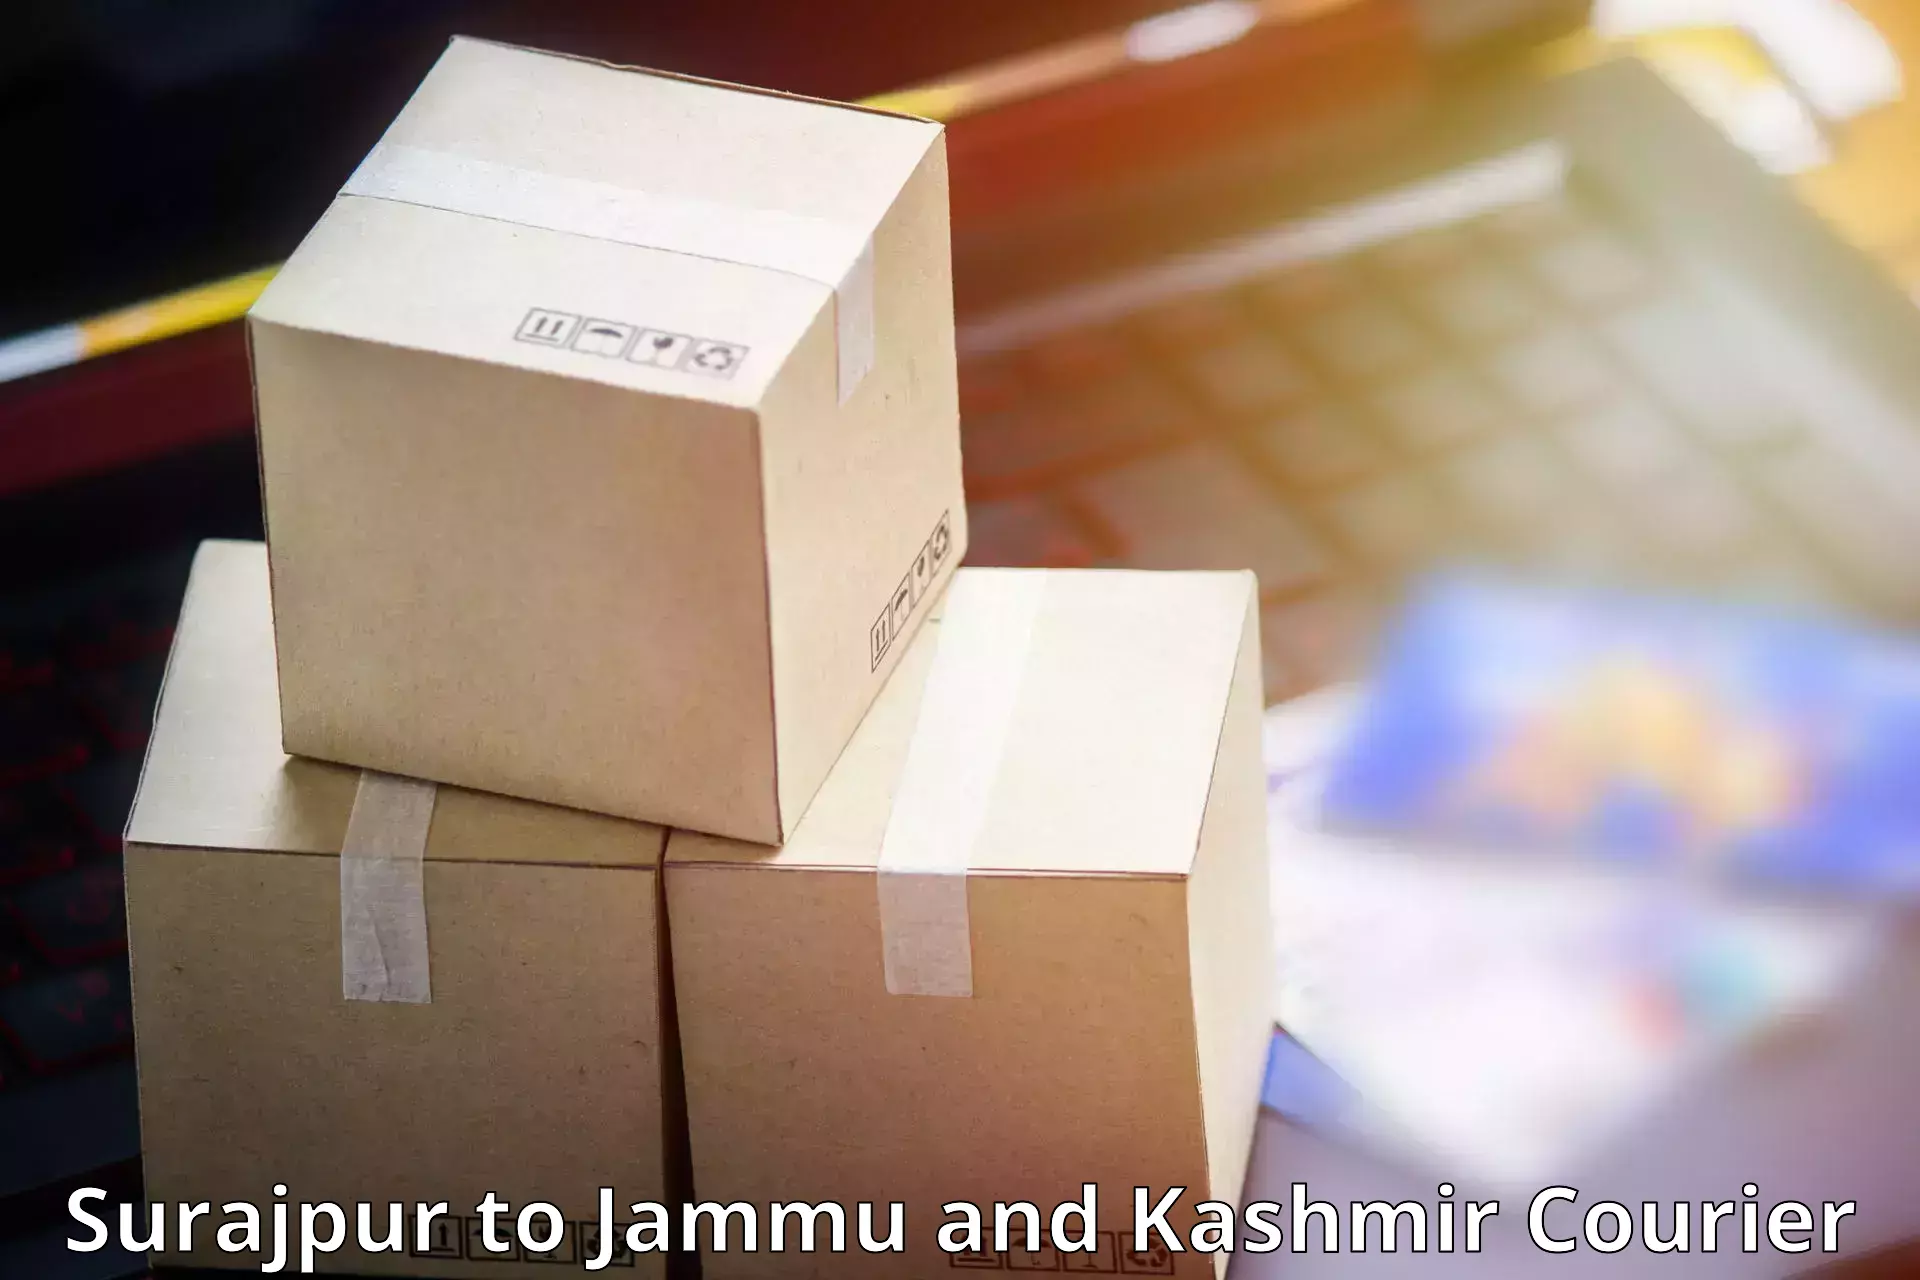 Global shipping networks in Surajpur to Jammu